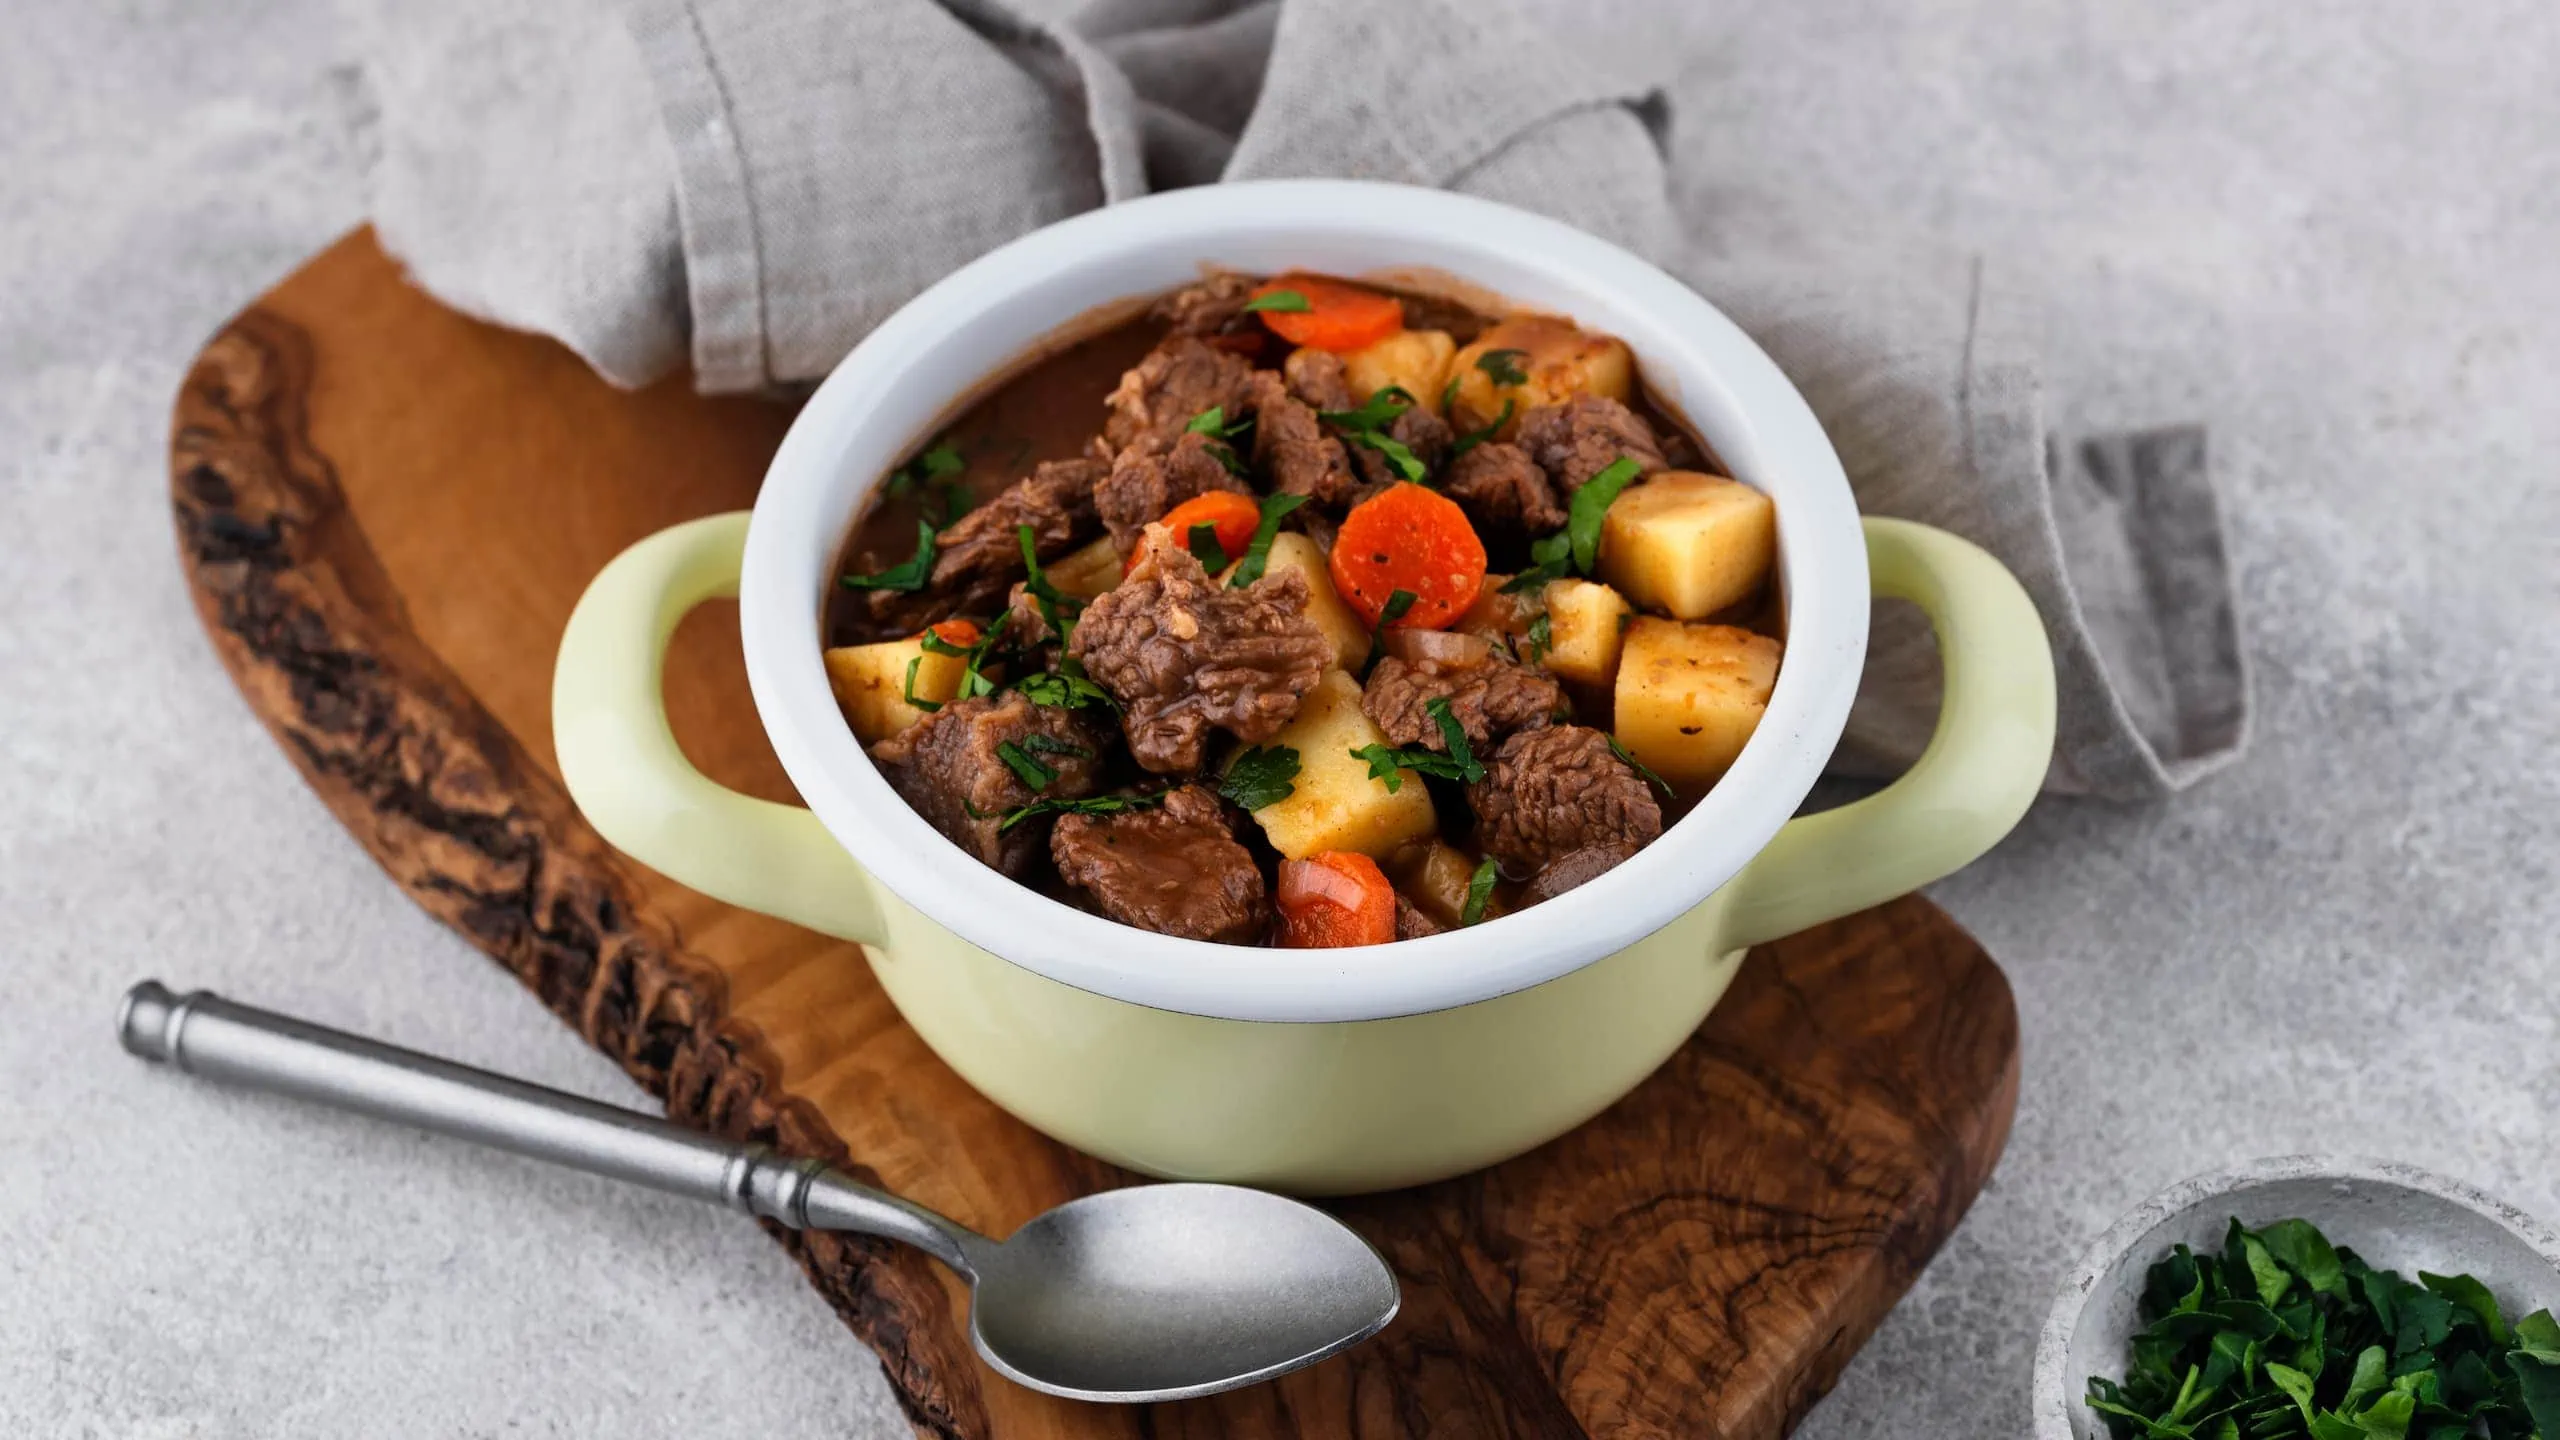 Our version of Dinty Moore beef stew recipe